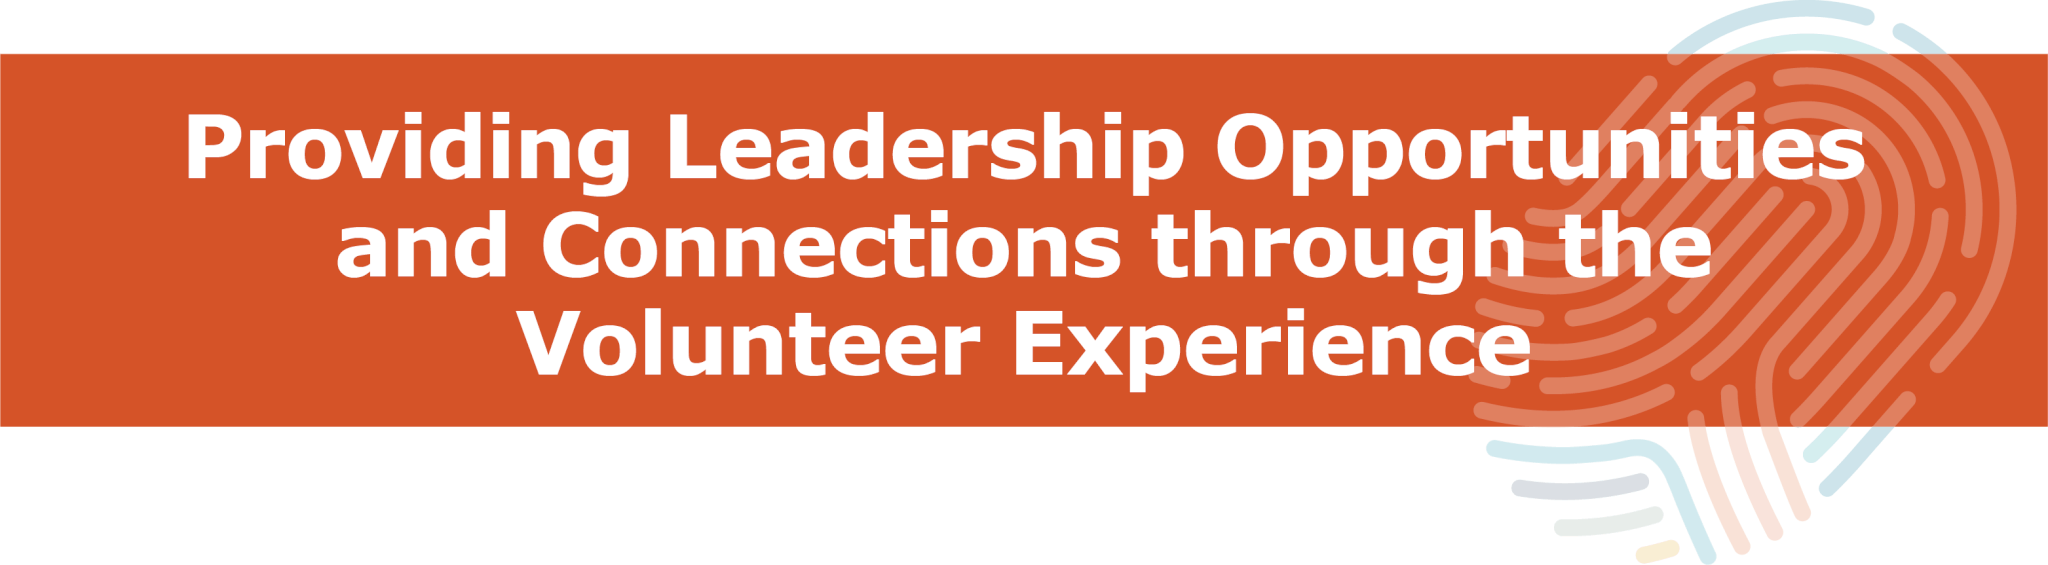 Providing Leadership Opportunities and Connections through the Volunteer Experience Header Graphic